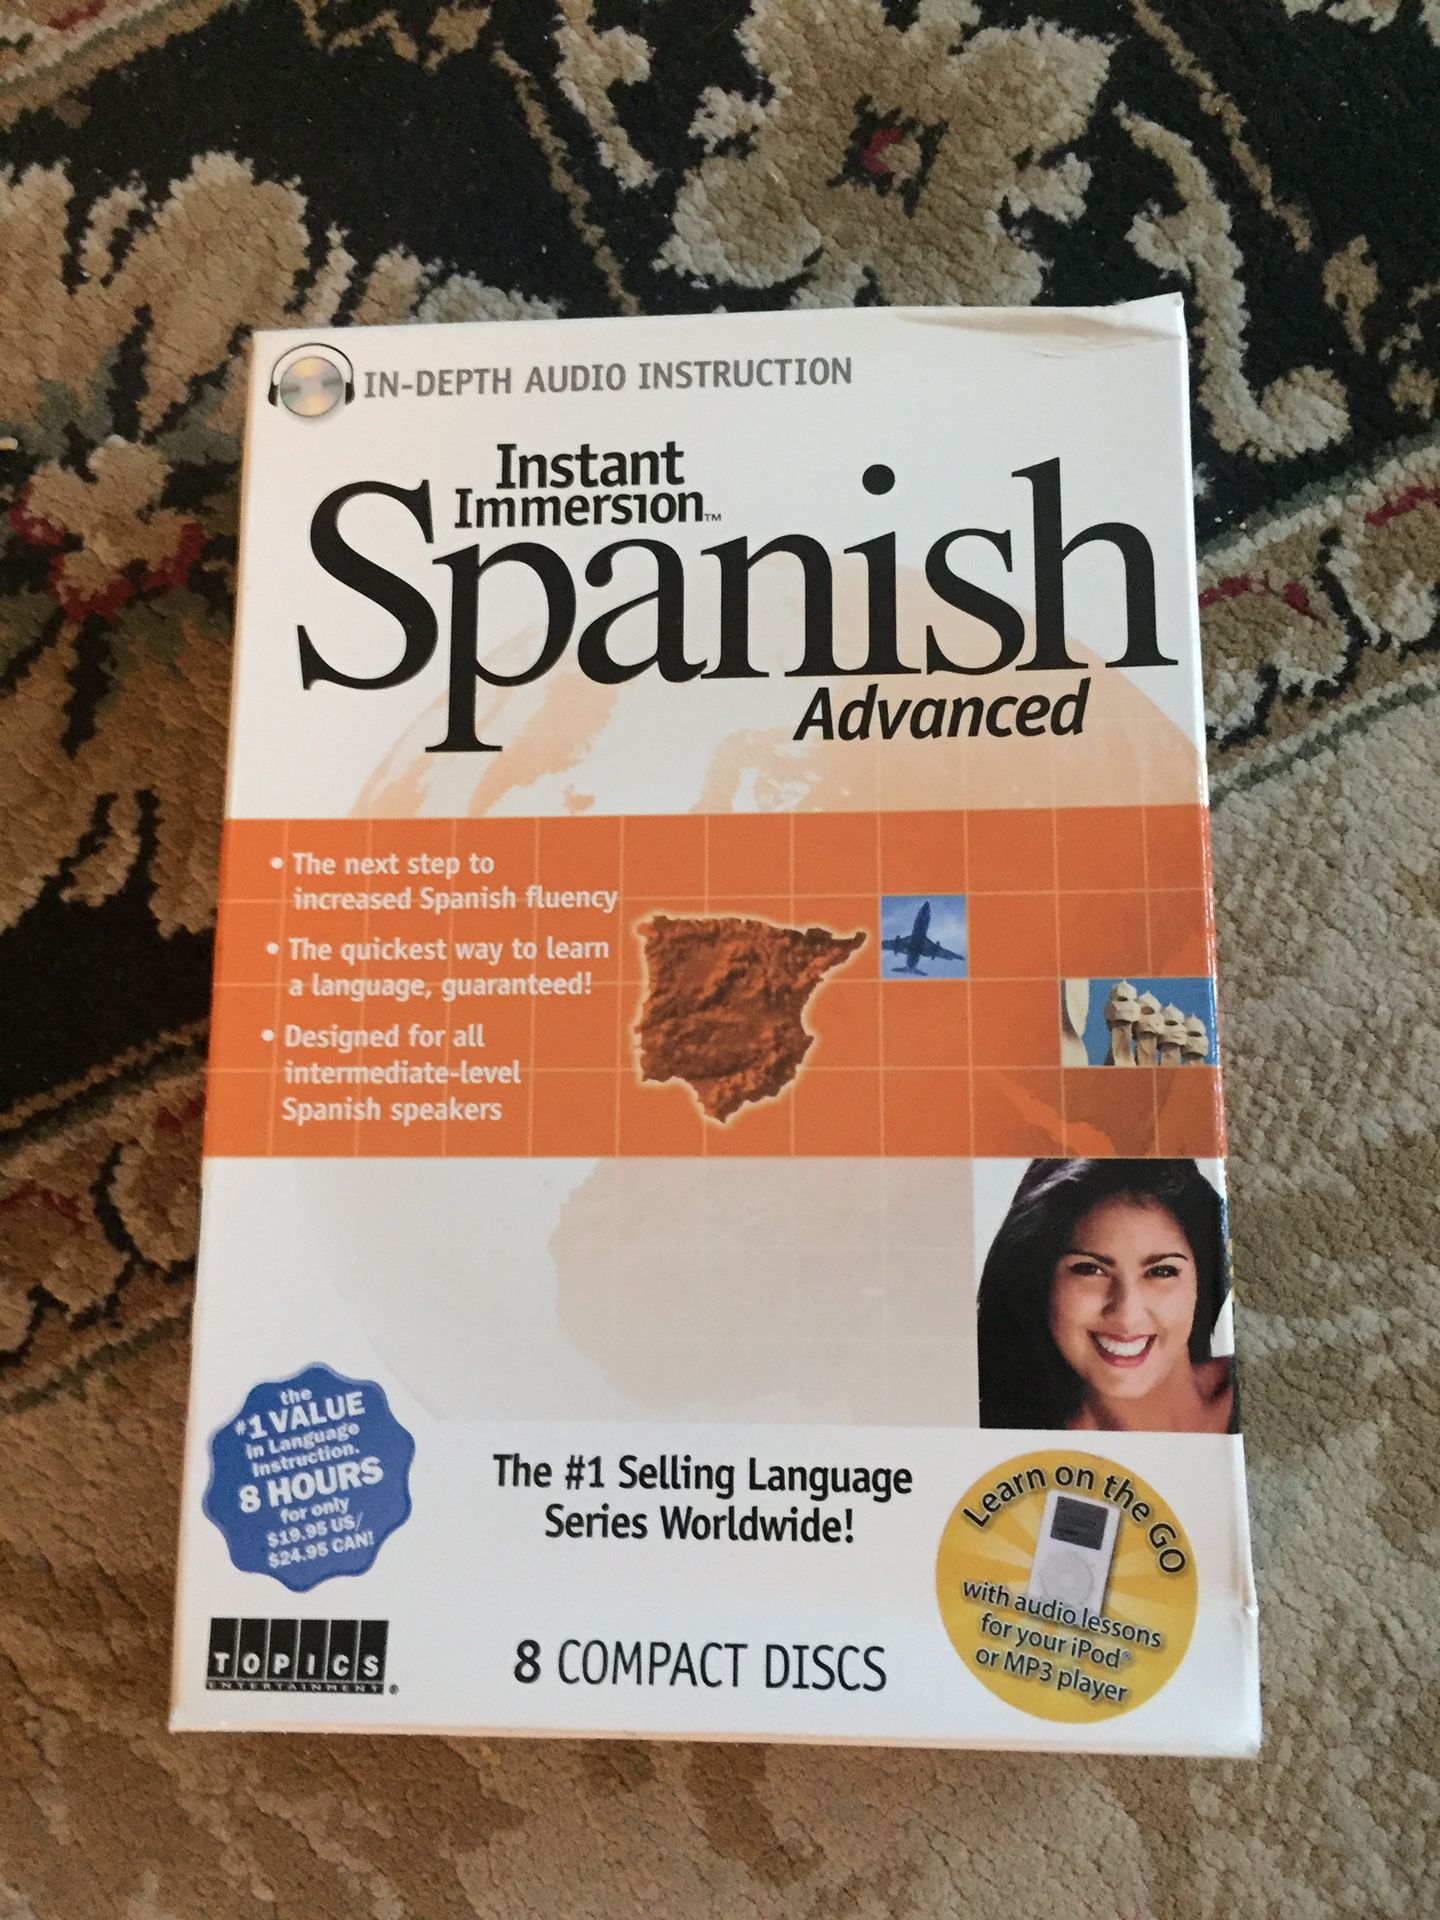 Instant Immersion Spanish Tutor/ Training / Learning , Advanced. 8 CDs. Never Used $10 OBO